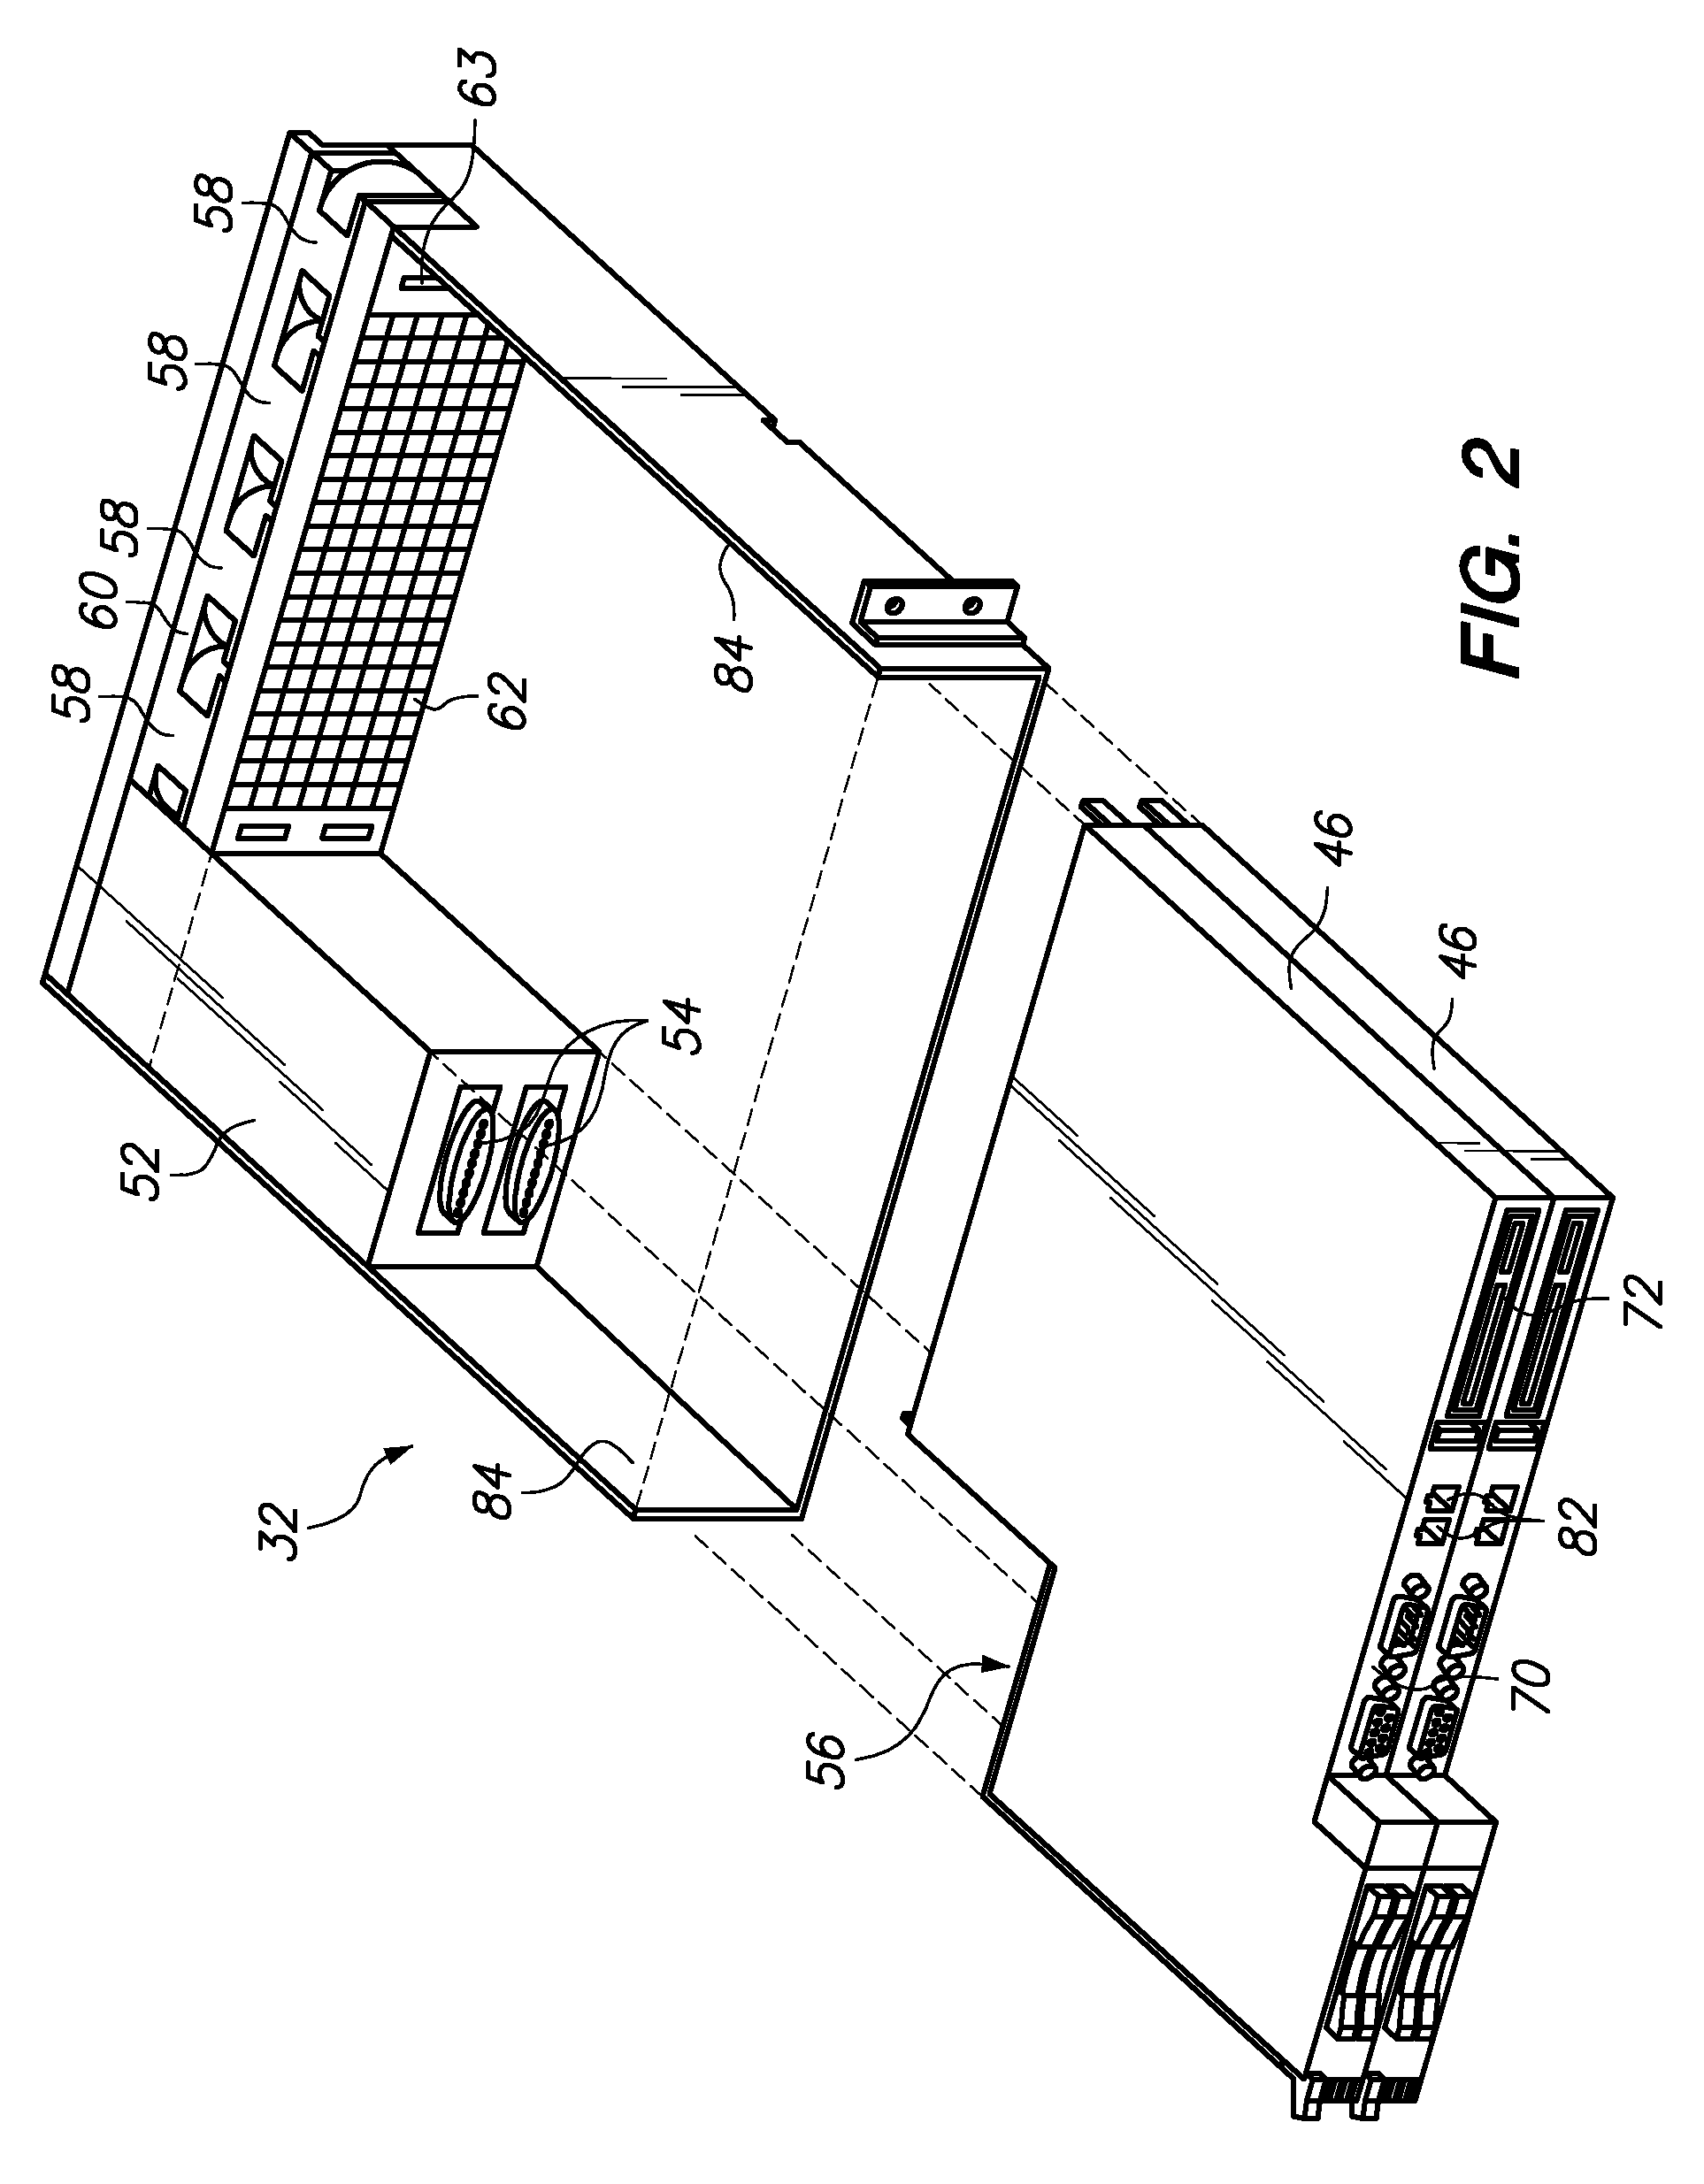 System Power Capping Using Information Received From The Installed Power Supply